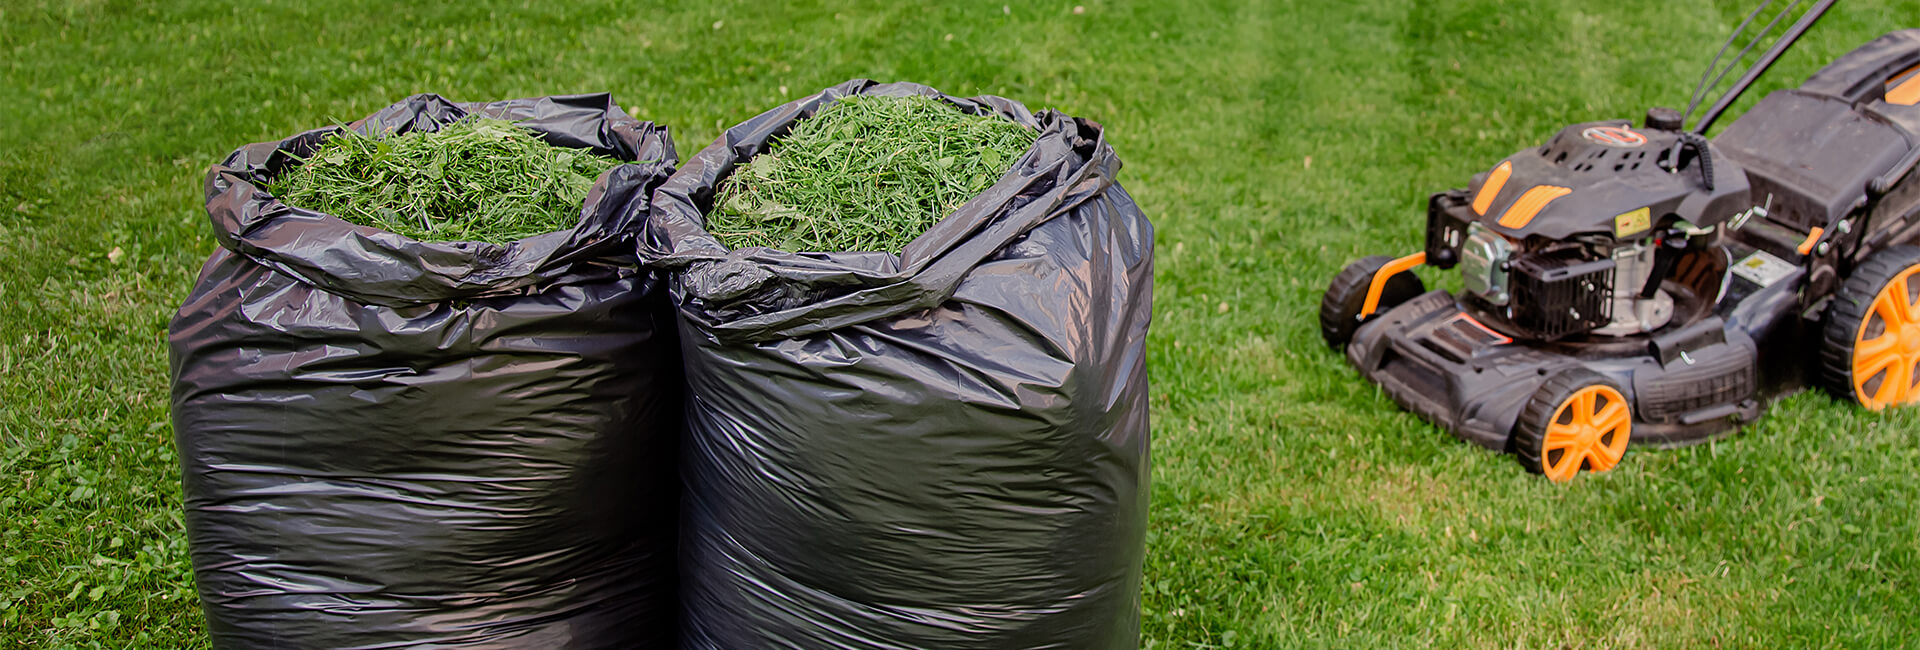 Grass clippings in bags for mulch